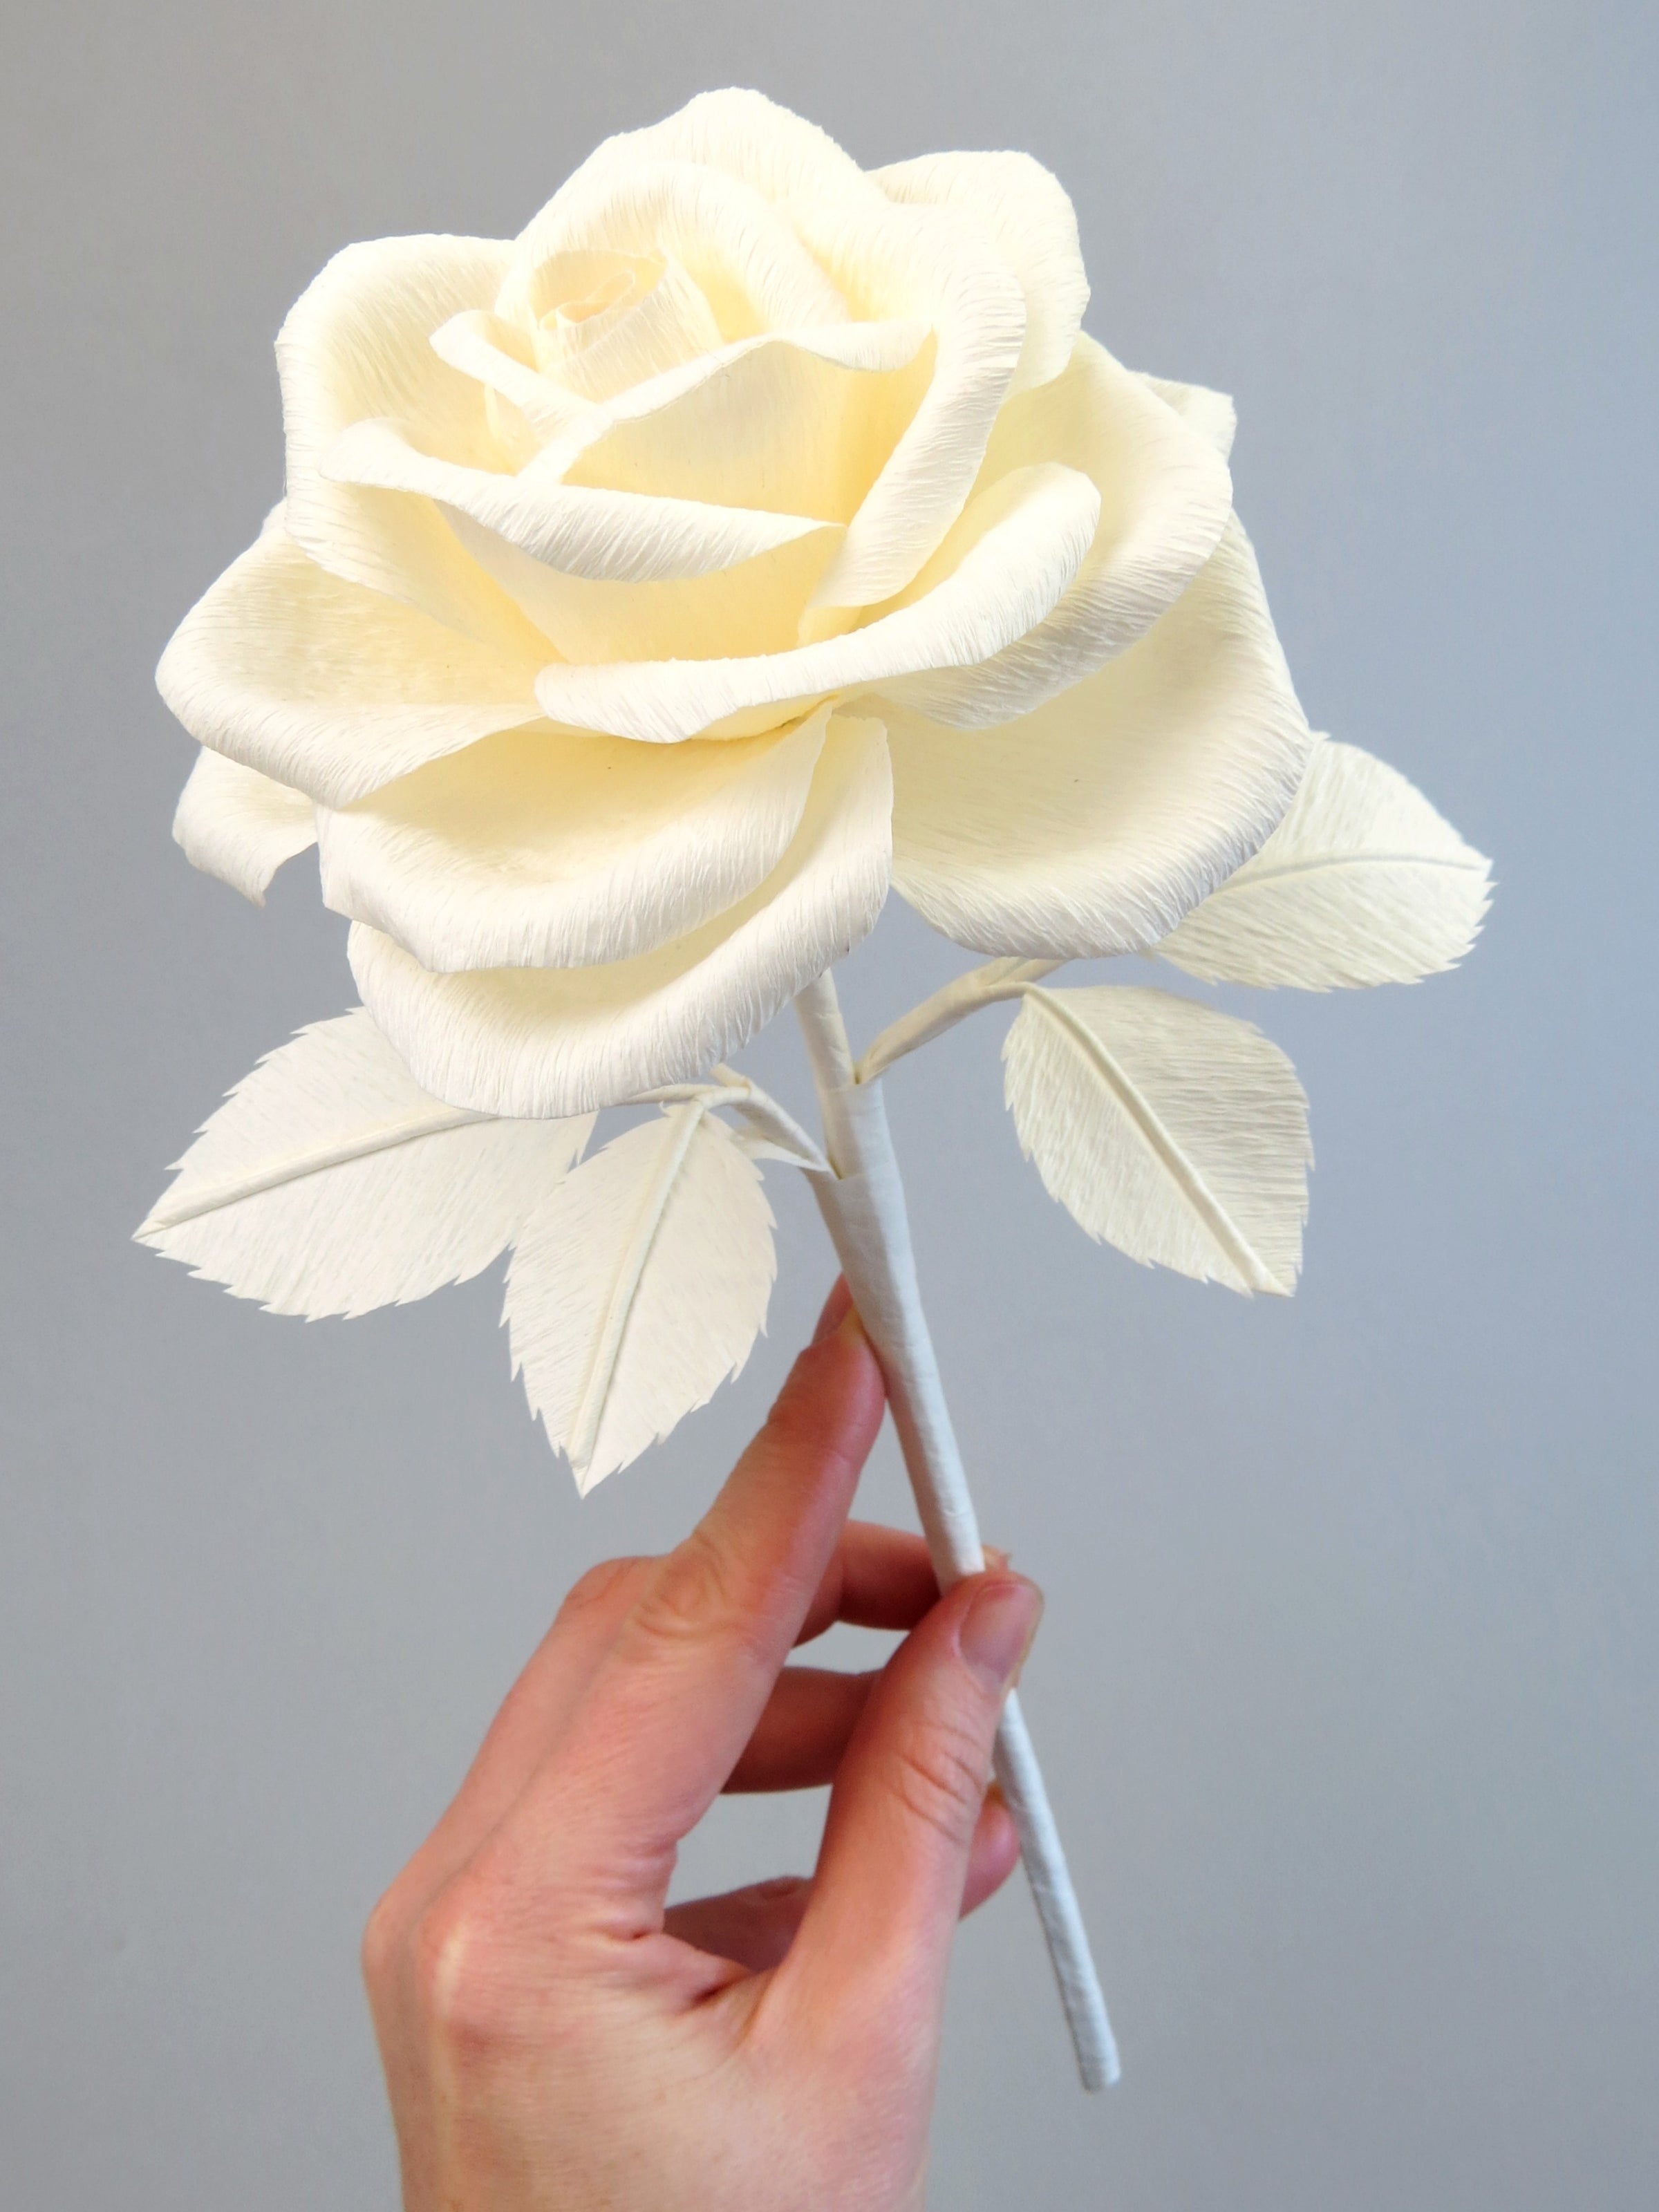 Pale white hand delicately holding the stem of an ivory paper rose with six ivory leaves